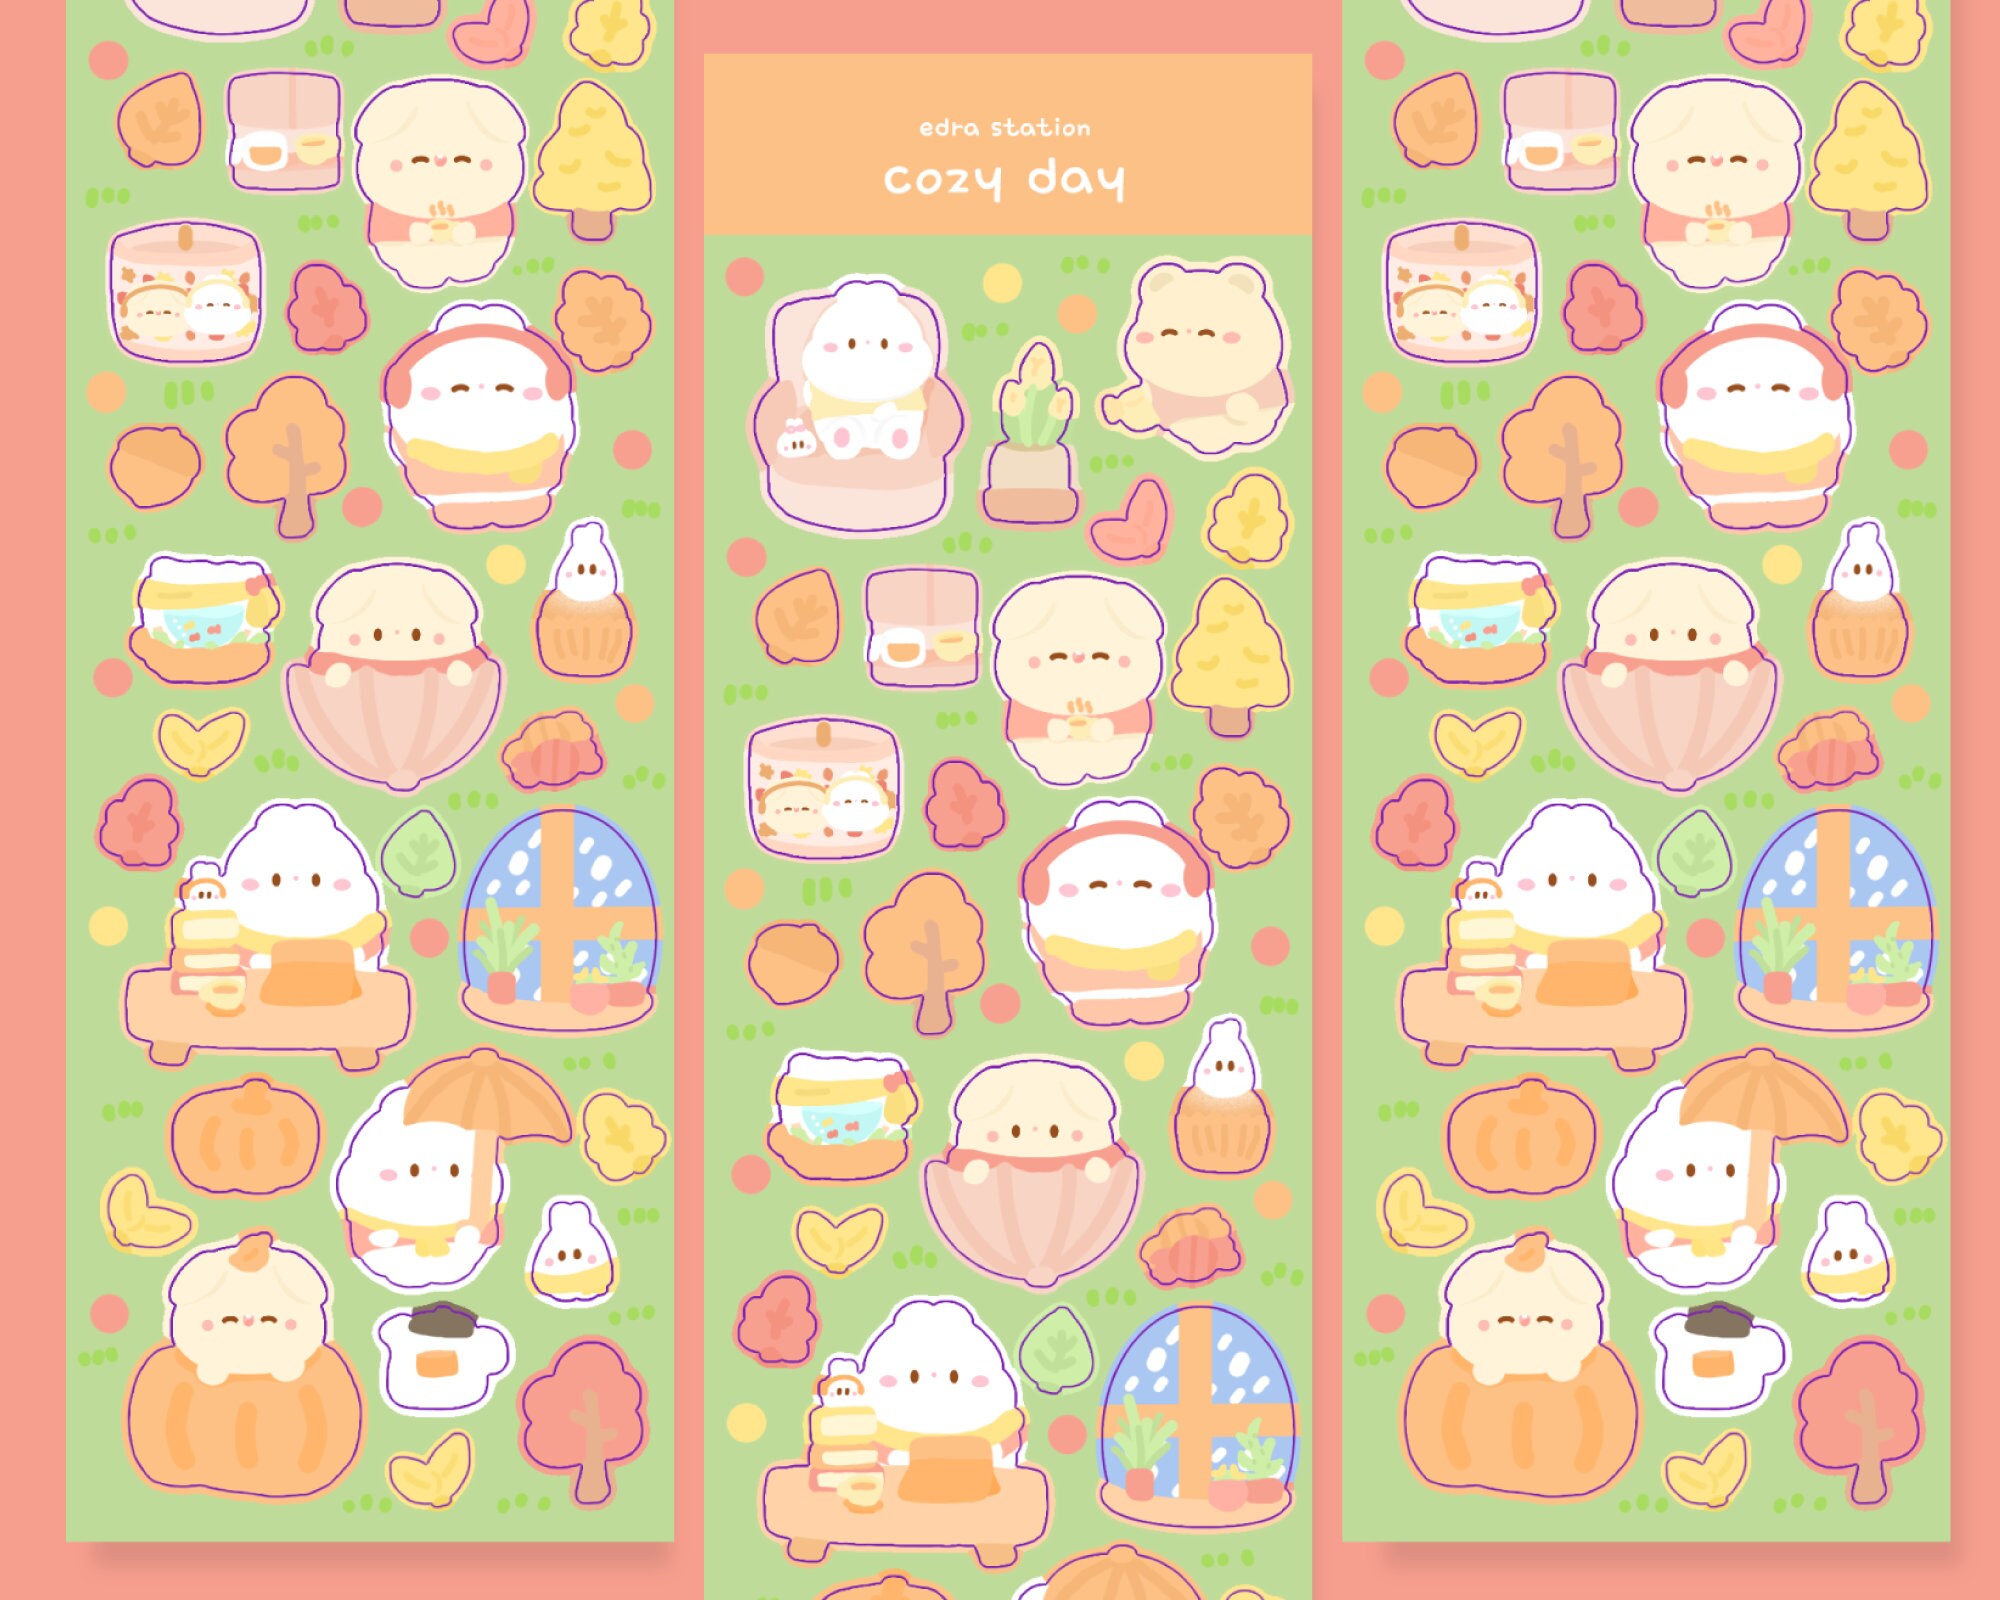 Kawaii Food Sticker Sheet, Cute Stickers, Colorful, Happy Faces, Journal  Stickers, Scrapbook Stickers, Planner Stickers